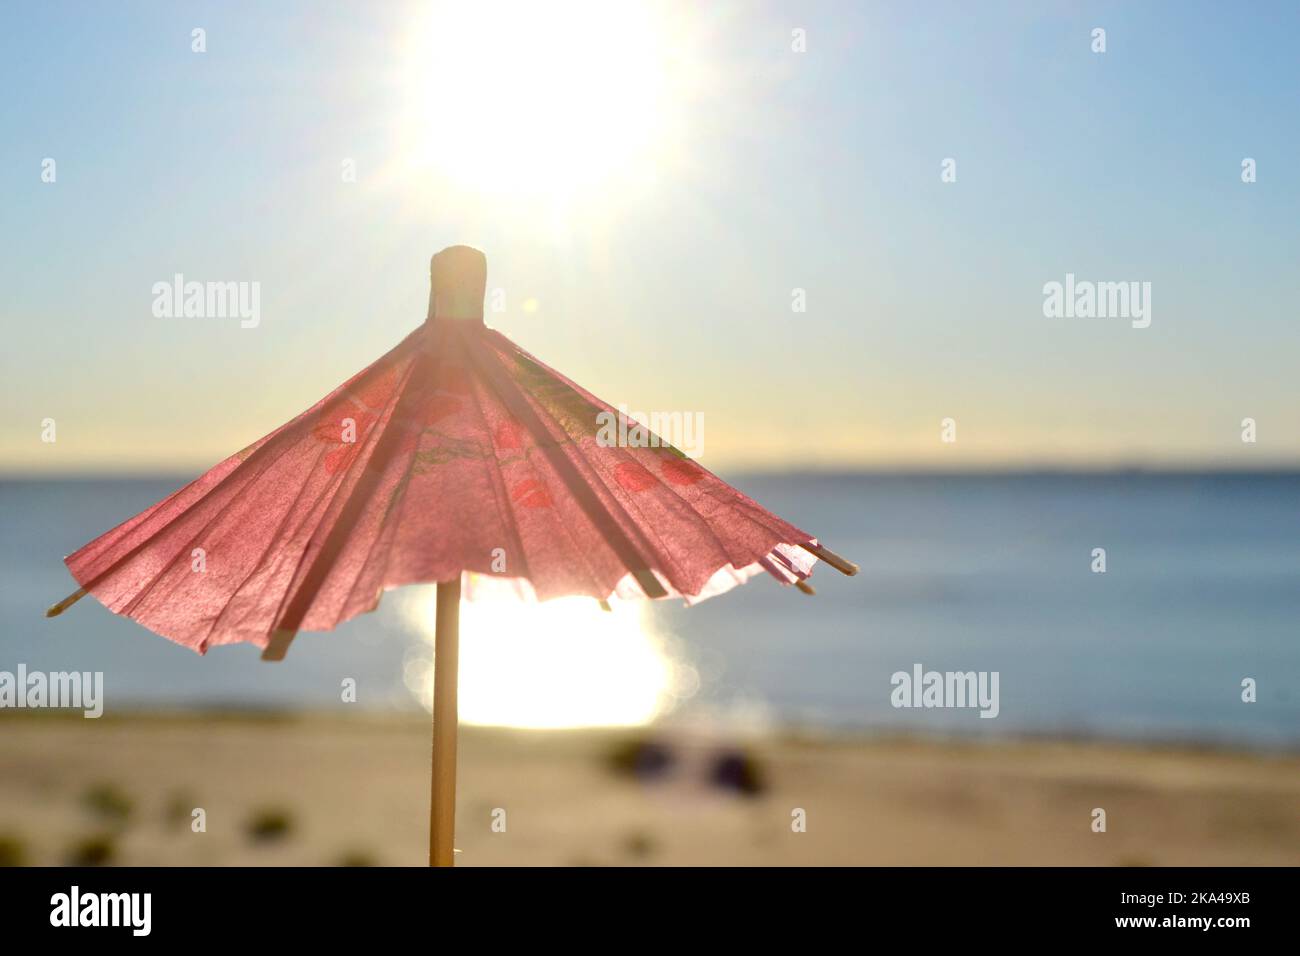 One red paper umbrellas cocktail decorations on background of blue sky, brightly shining sun and sunny path on surface of blue sea. Concept of summer, sea, vacation, travel tourism Stock Photo